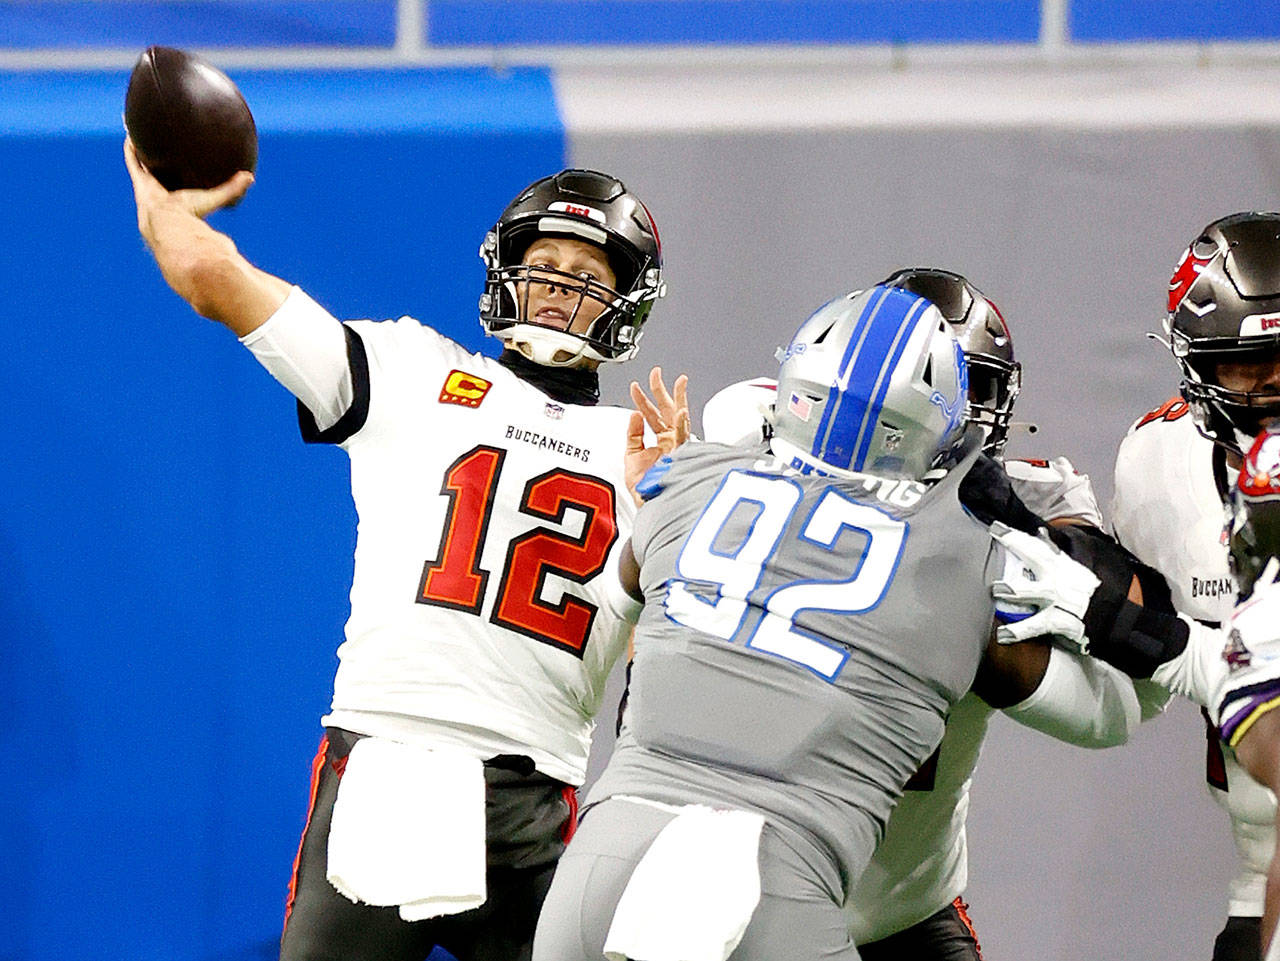 Tampa Bay Buccaneers quarterback Tom Brady (12) passes in the first half against the Detroit Lions during an NFL football game, Saturday, Dec. 26, 2020, in Detroit. (AP Photo/Rick Osentoski)